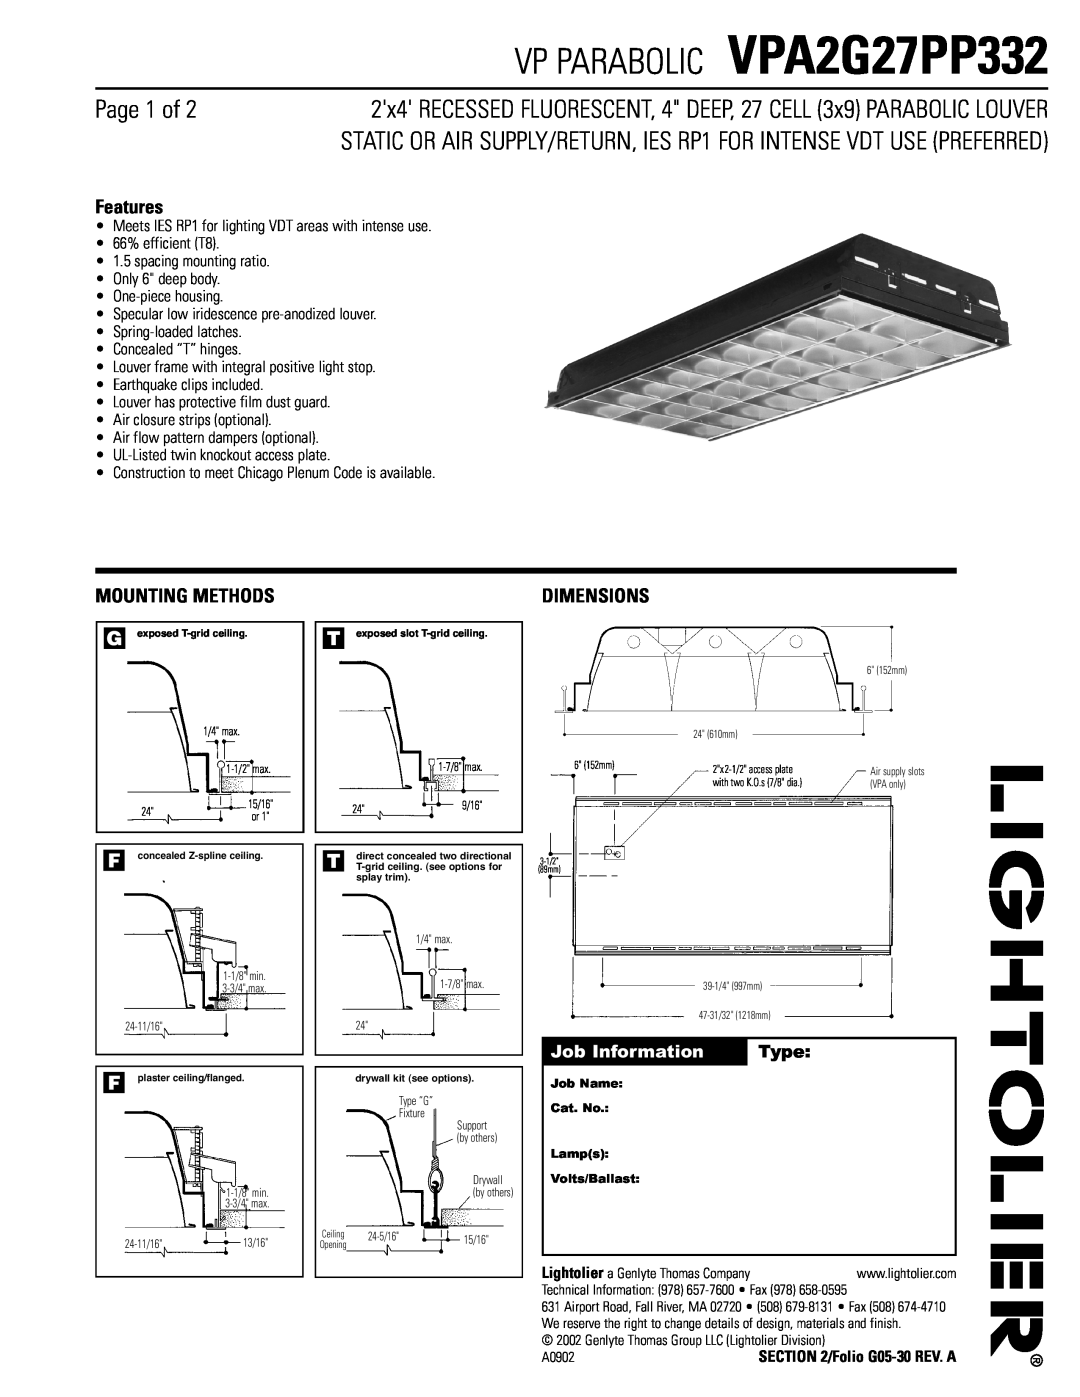 Lightolier dimensions VP PARABOLIC VPA2G27PP332, Page 1 of, Features, Mounting Methods, Dimensions 